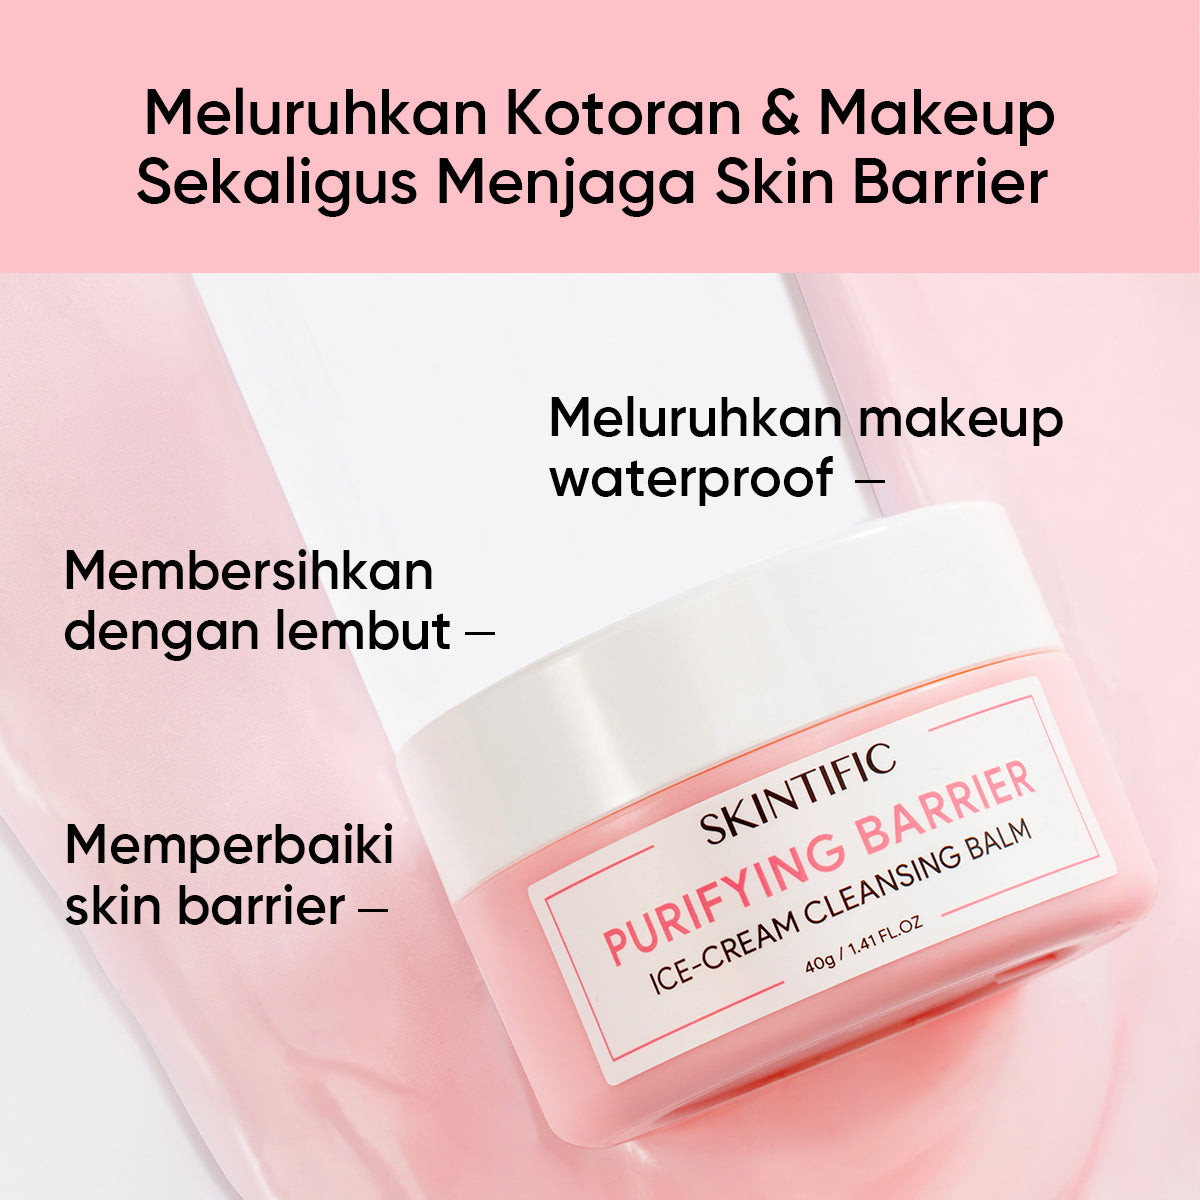 Purifying Barrier Ice Cream Cleansing Balm